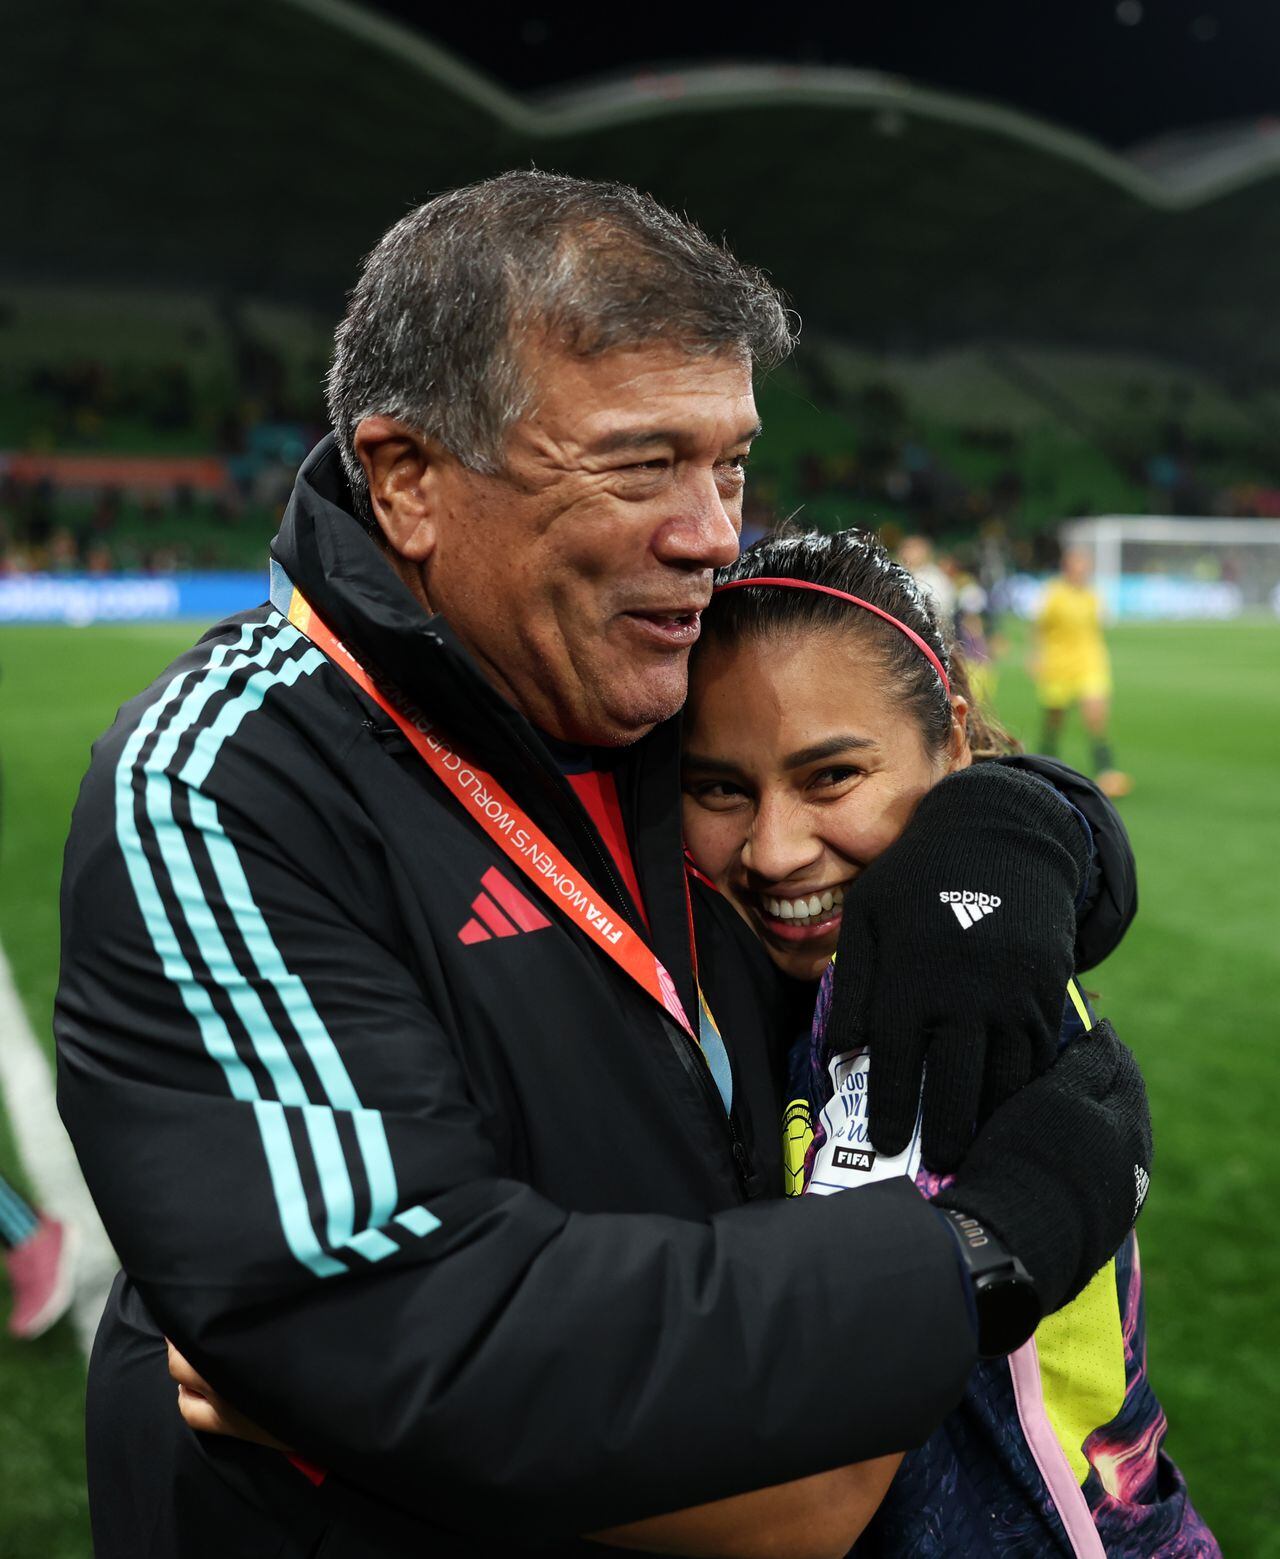 MELBOURNE, AUSTRALIA - AUGUST 08: Leicy Santos of Colombia is congratulated by head coach Nelson Abadia after the team's 1-0 victory and advance to the quarter final following the FIFA Women's World Cup Australia & New Zealand 2023 Round of 16 match between Colombia and Jamaica at Melbourne Rectangular Stadium on August 08, 2023 in Melbourne / Naarm, Australia. (Photo by Alex Pantling - FIFA/FIFA via Getty Images)